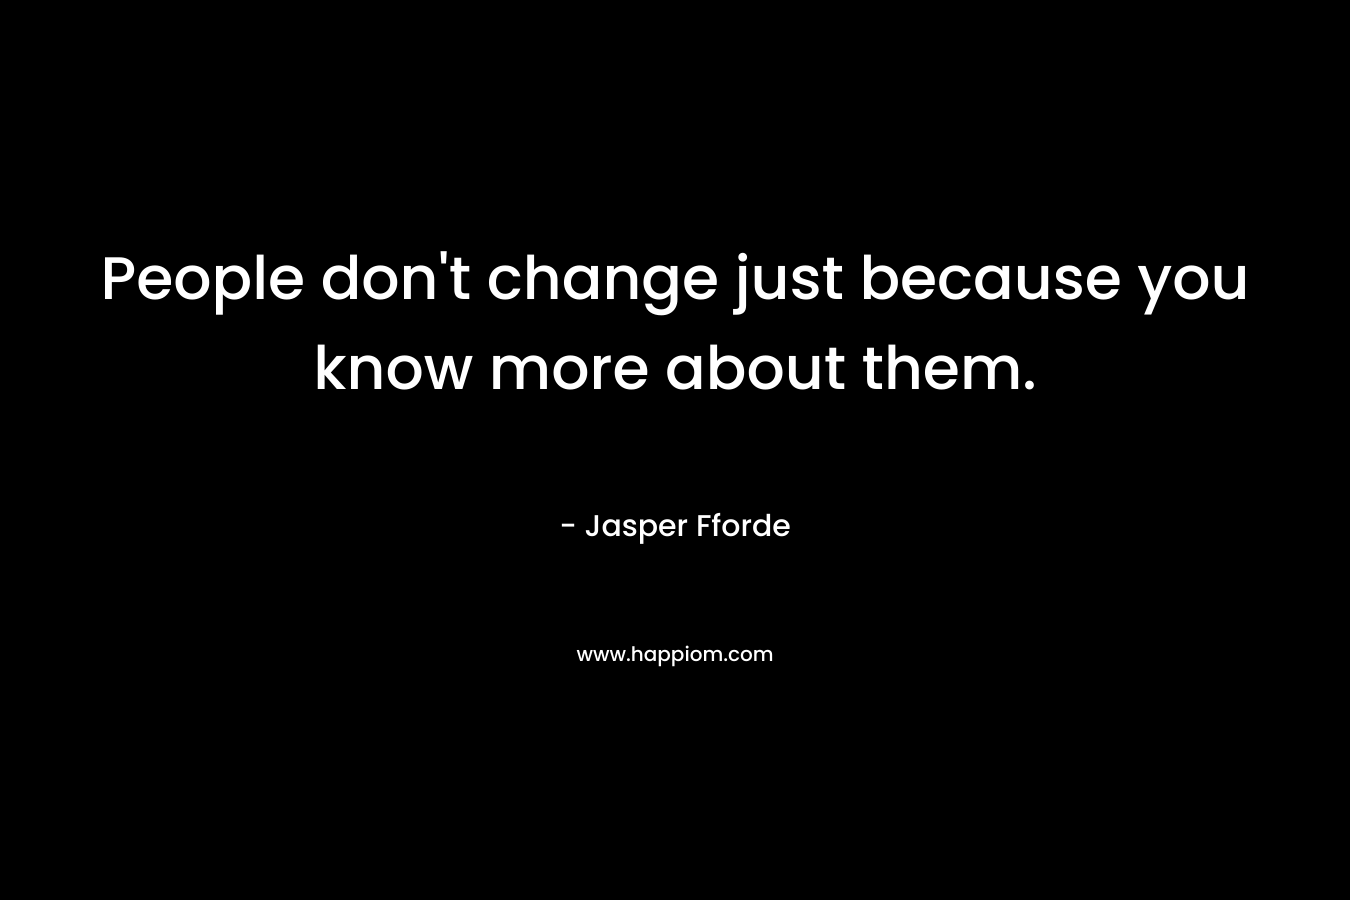 People don't change just because you know more about them.